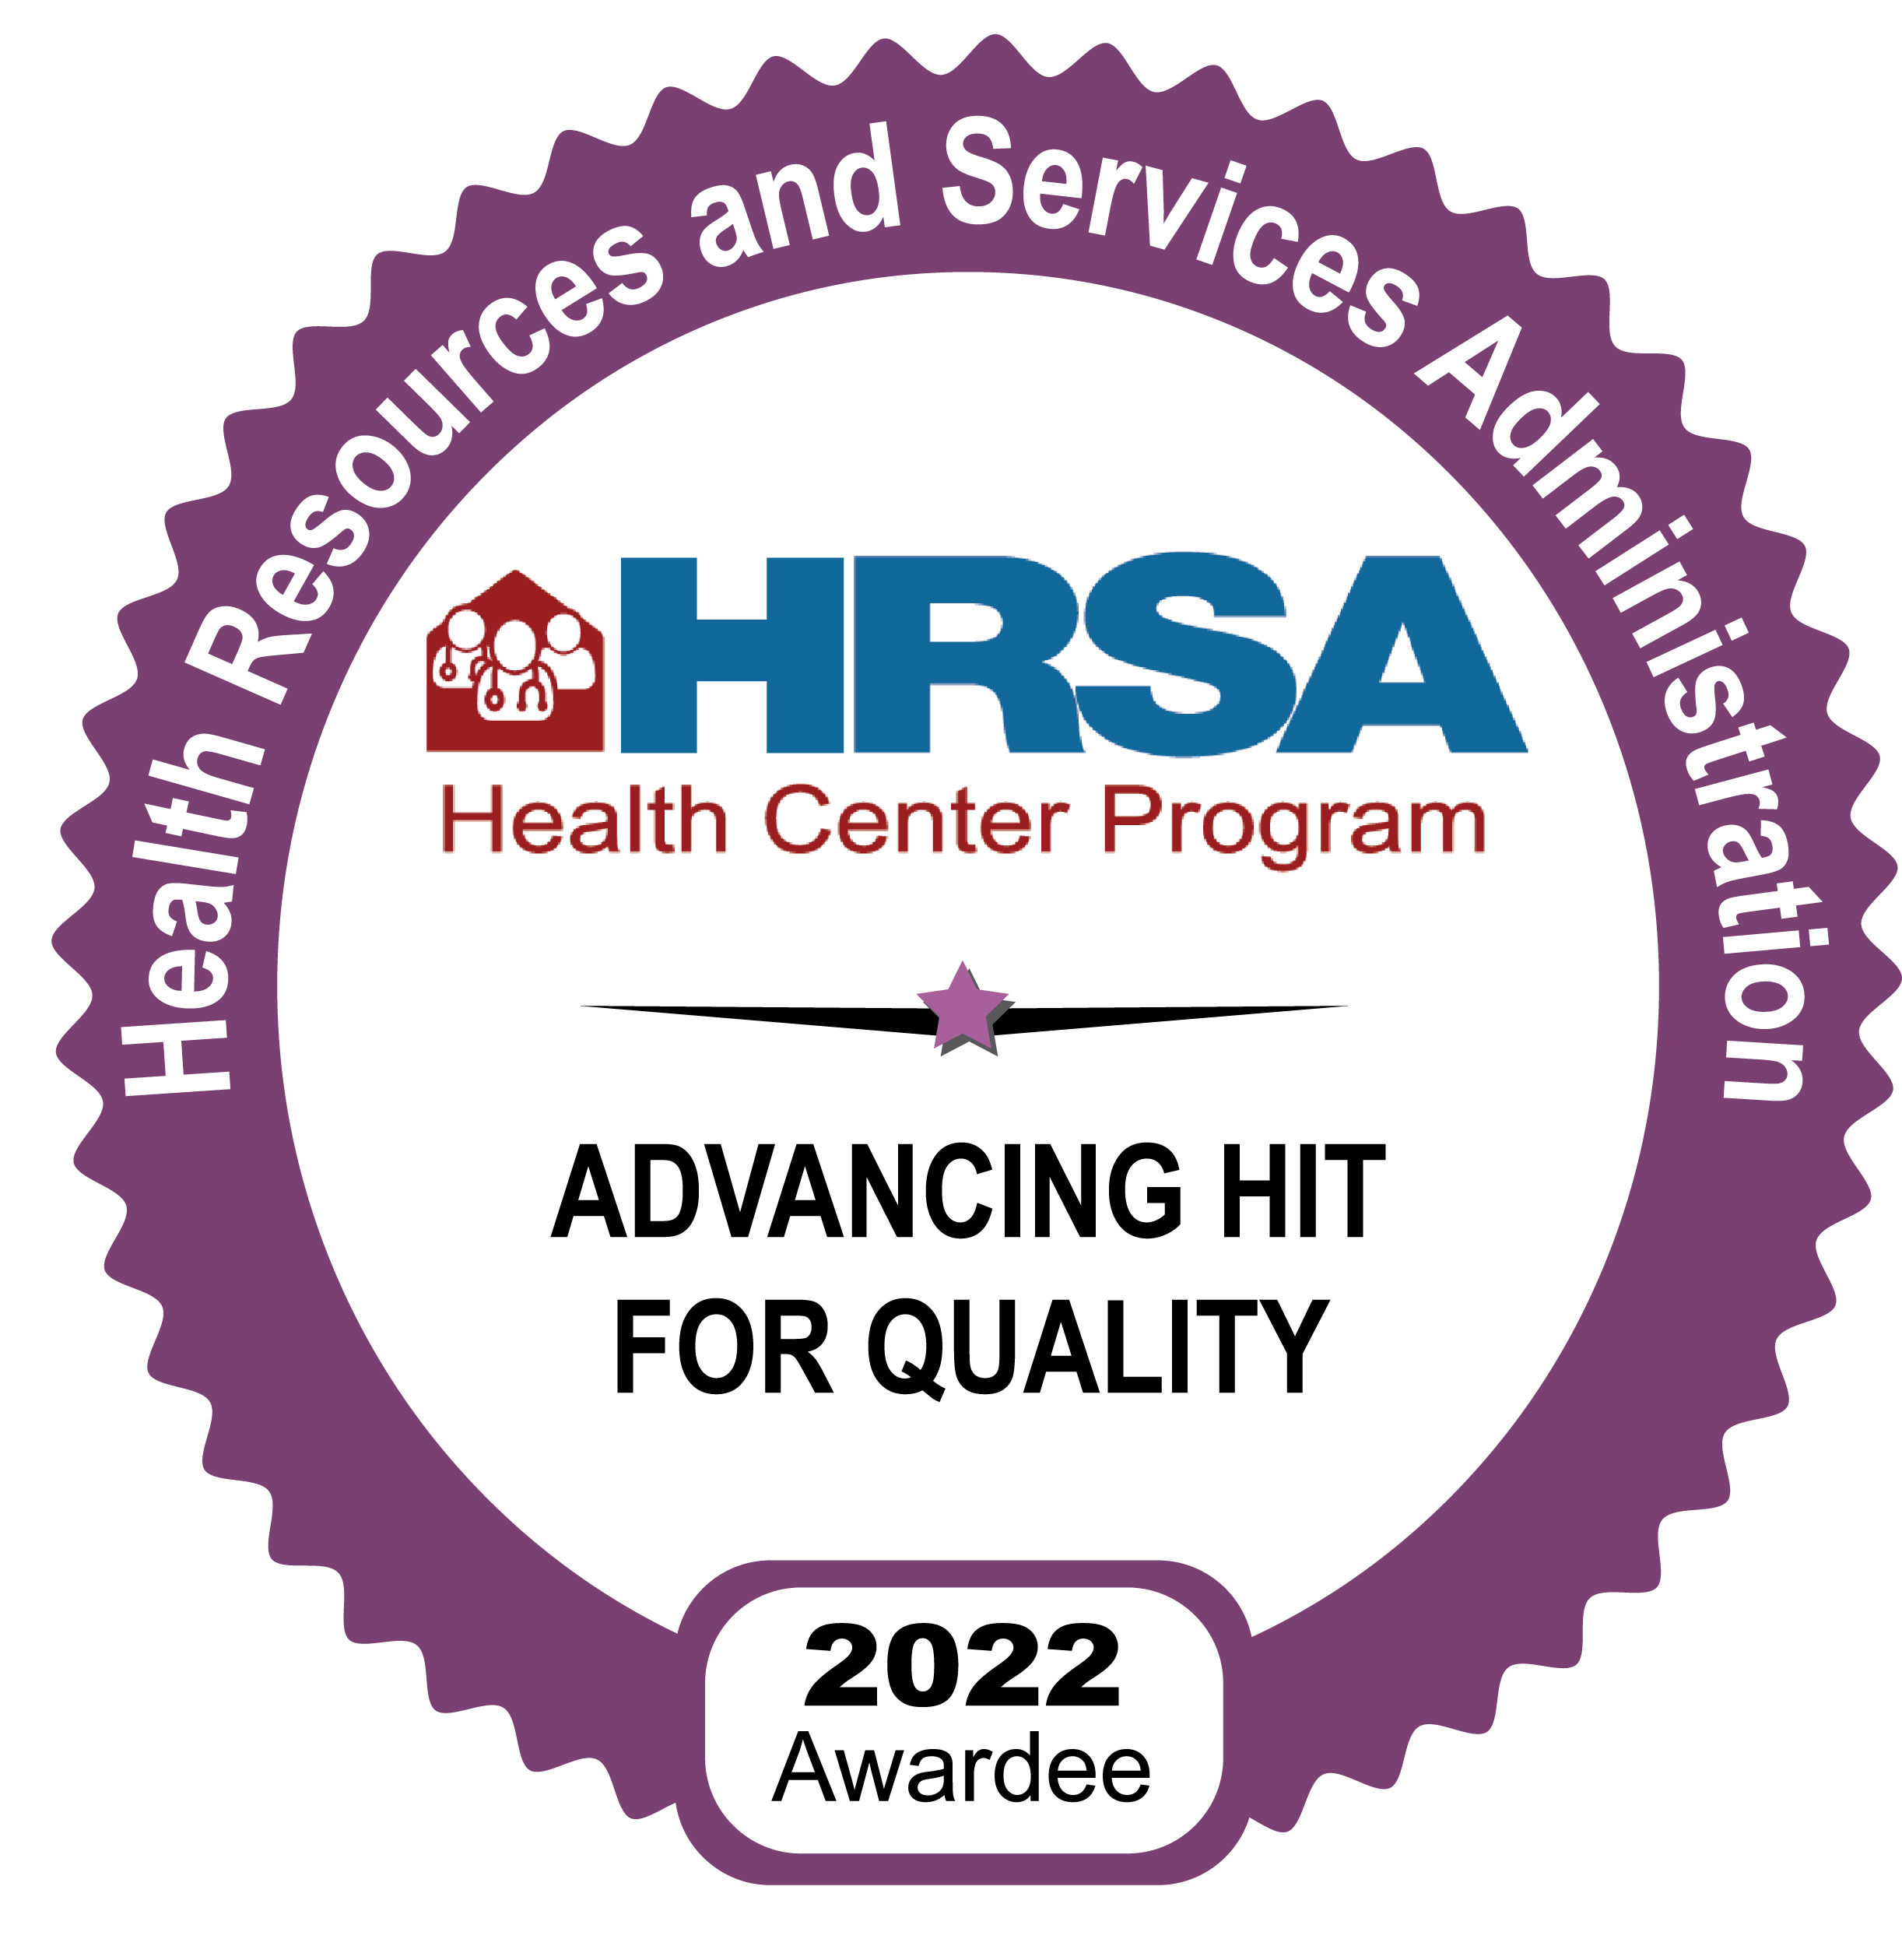 Health Resources and Services Administration Advancing HIT for Quality 2022 Awardee